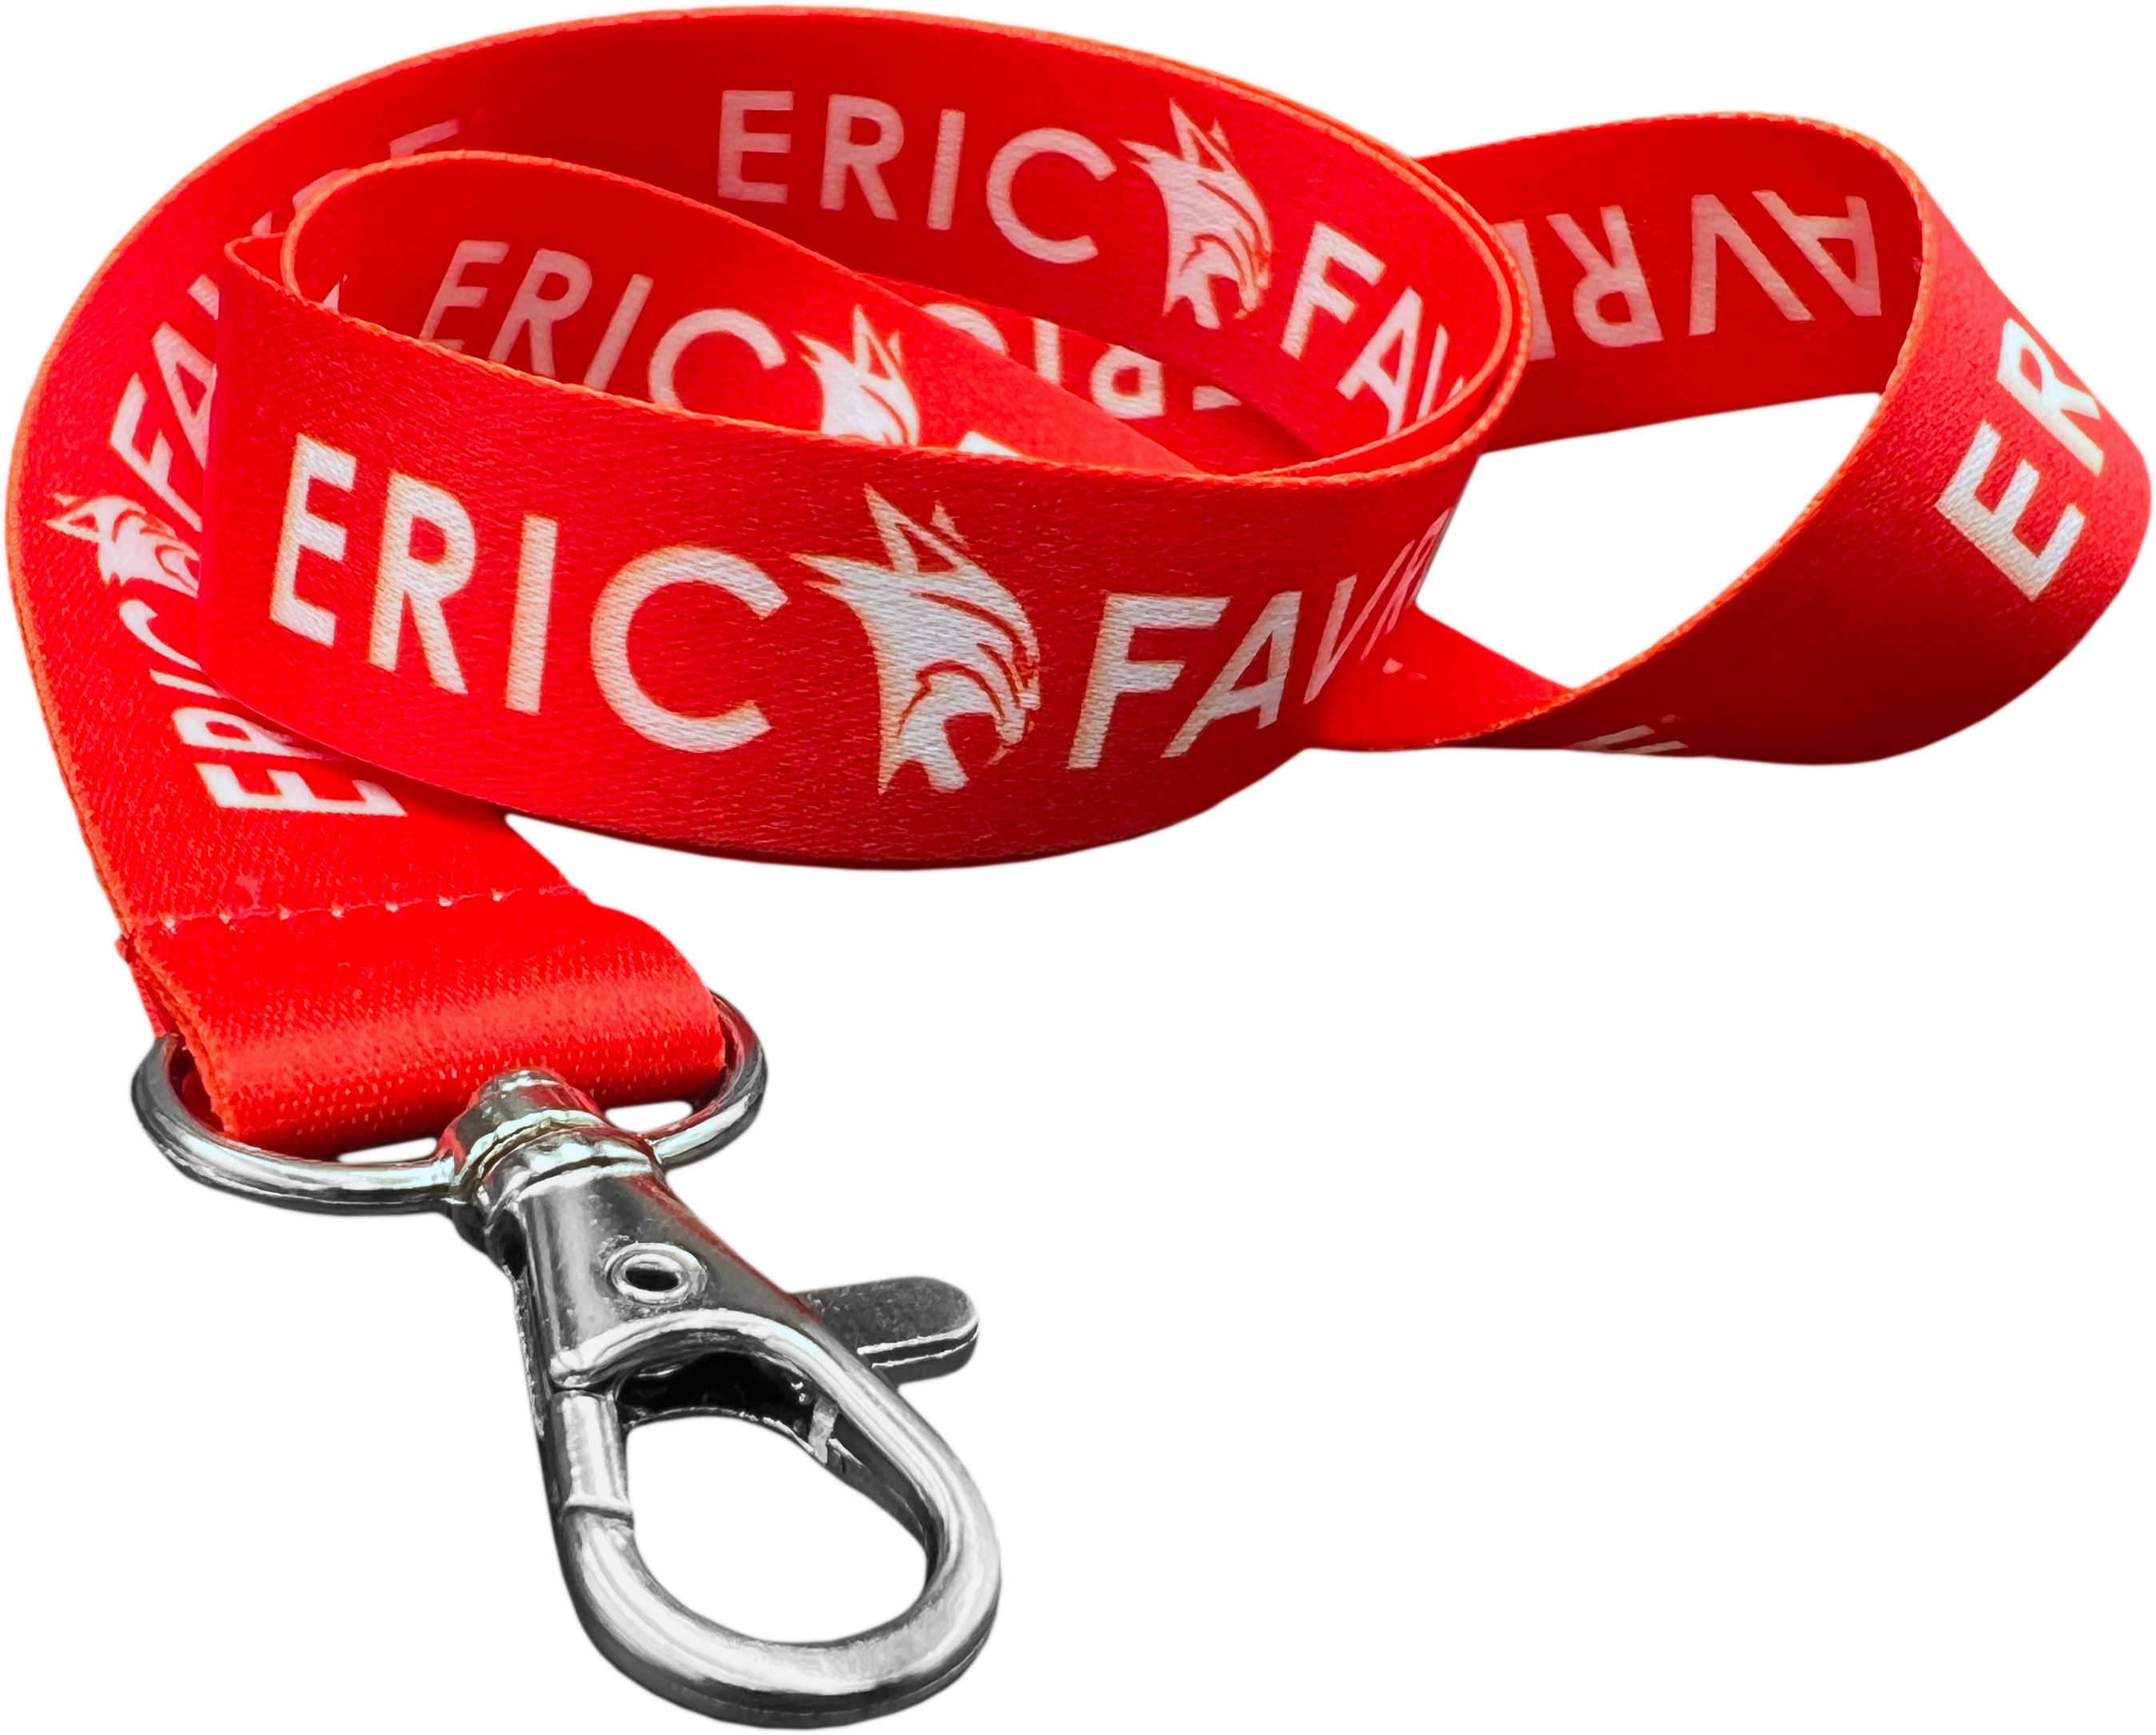 Eric Facre Кeychain Link - Red